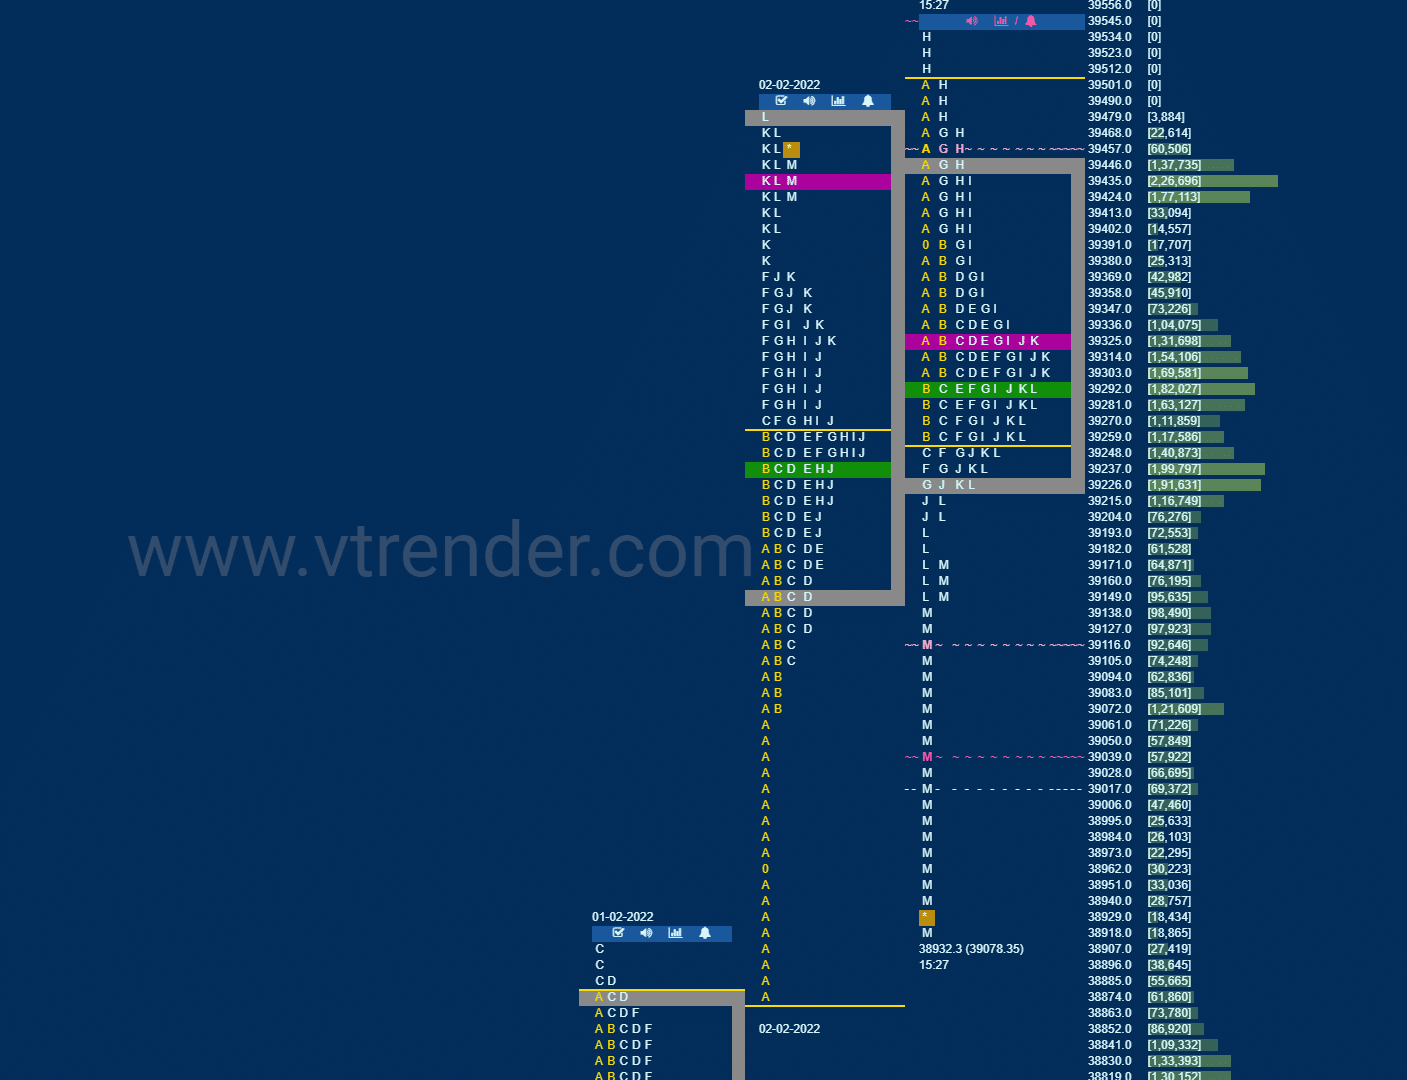 Bnf 2 Market Profile Analysis Dated 03Rd February 2022 Banknifty Futures, Charts, Day Trading, Intraday Trading, Intraday Trading Strategies, Market Profile, Market Profile Trading Strategies, Nifty Futures, Order Flow Analysis, Support And Resistance, Technical Analysis, Trading Strategies, Volume Profile Trading